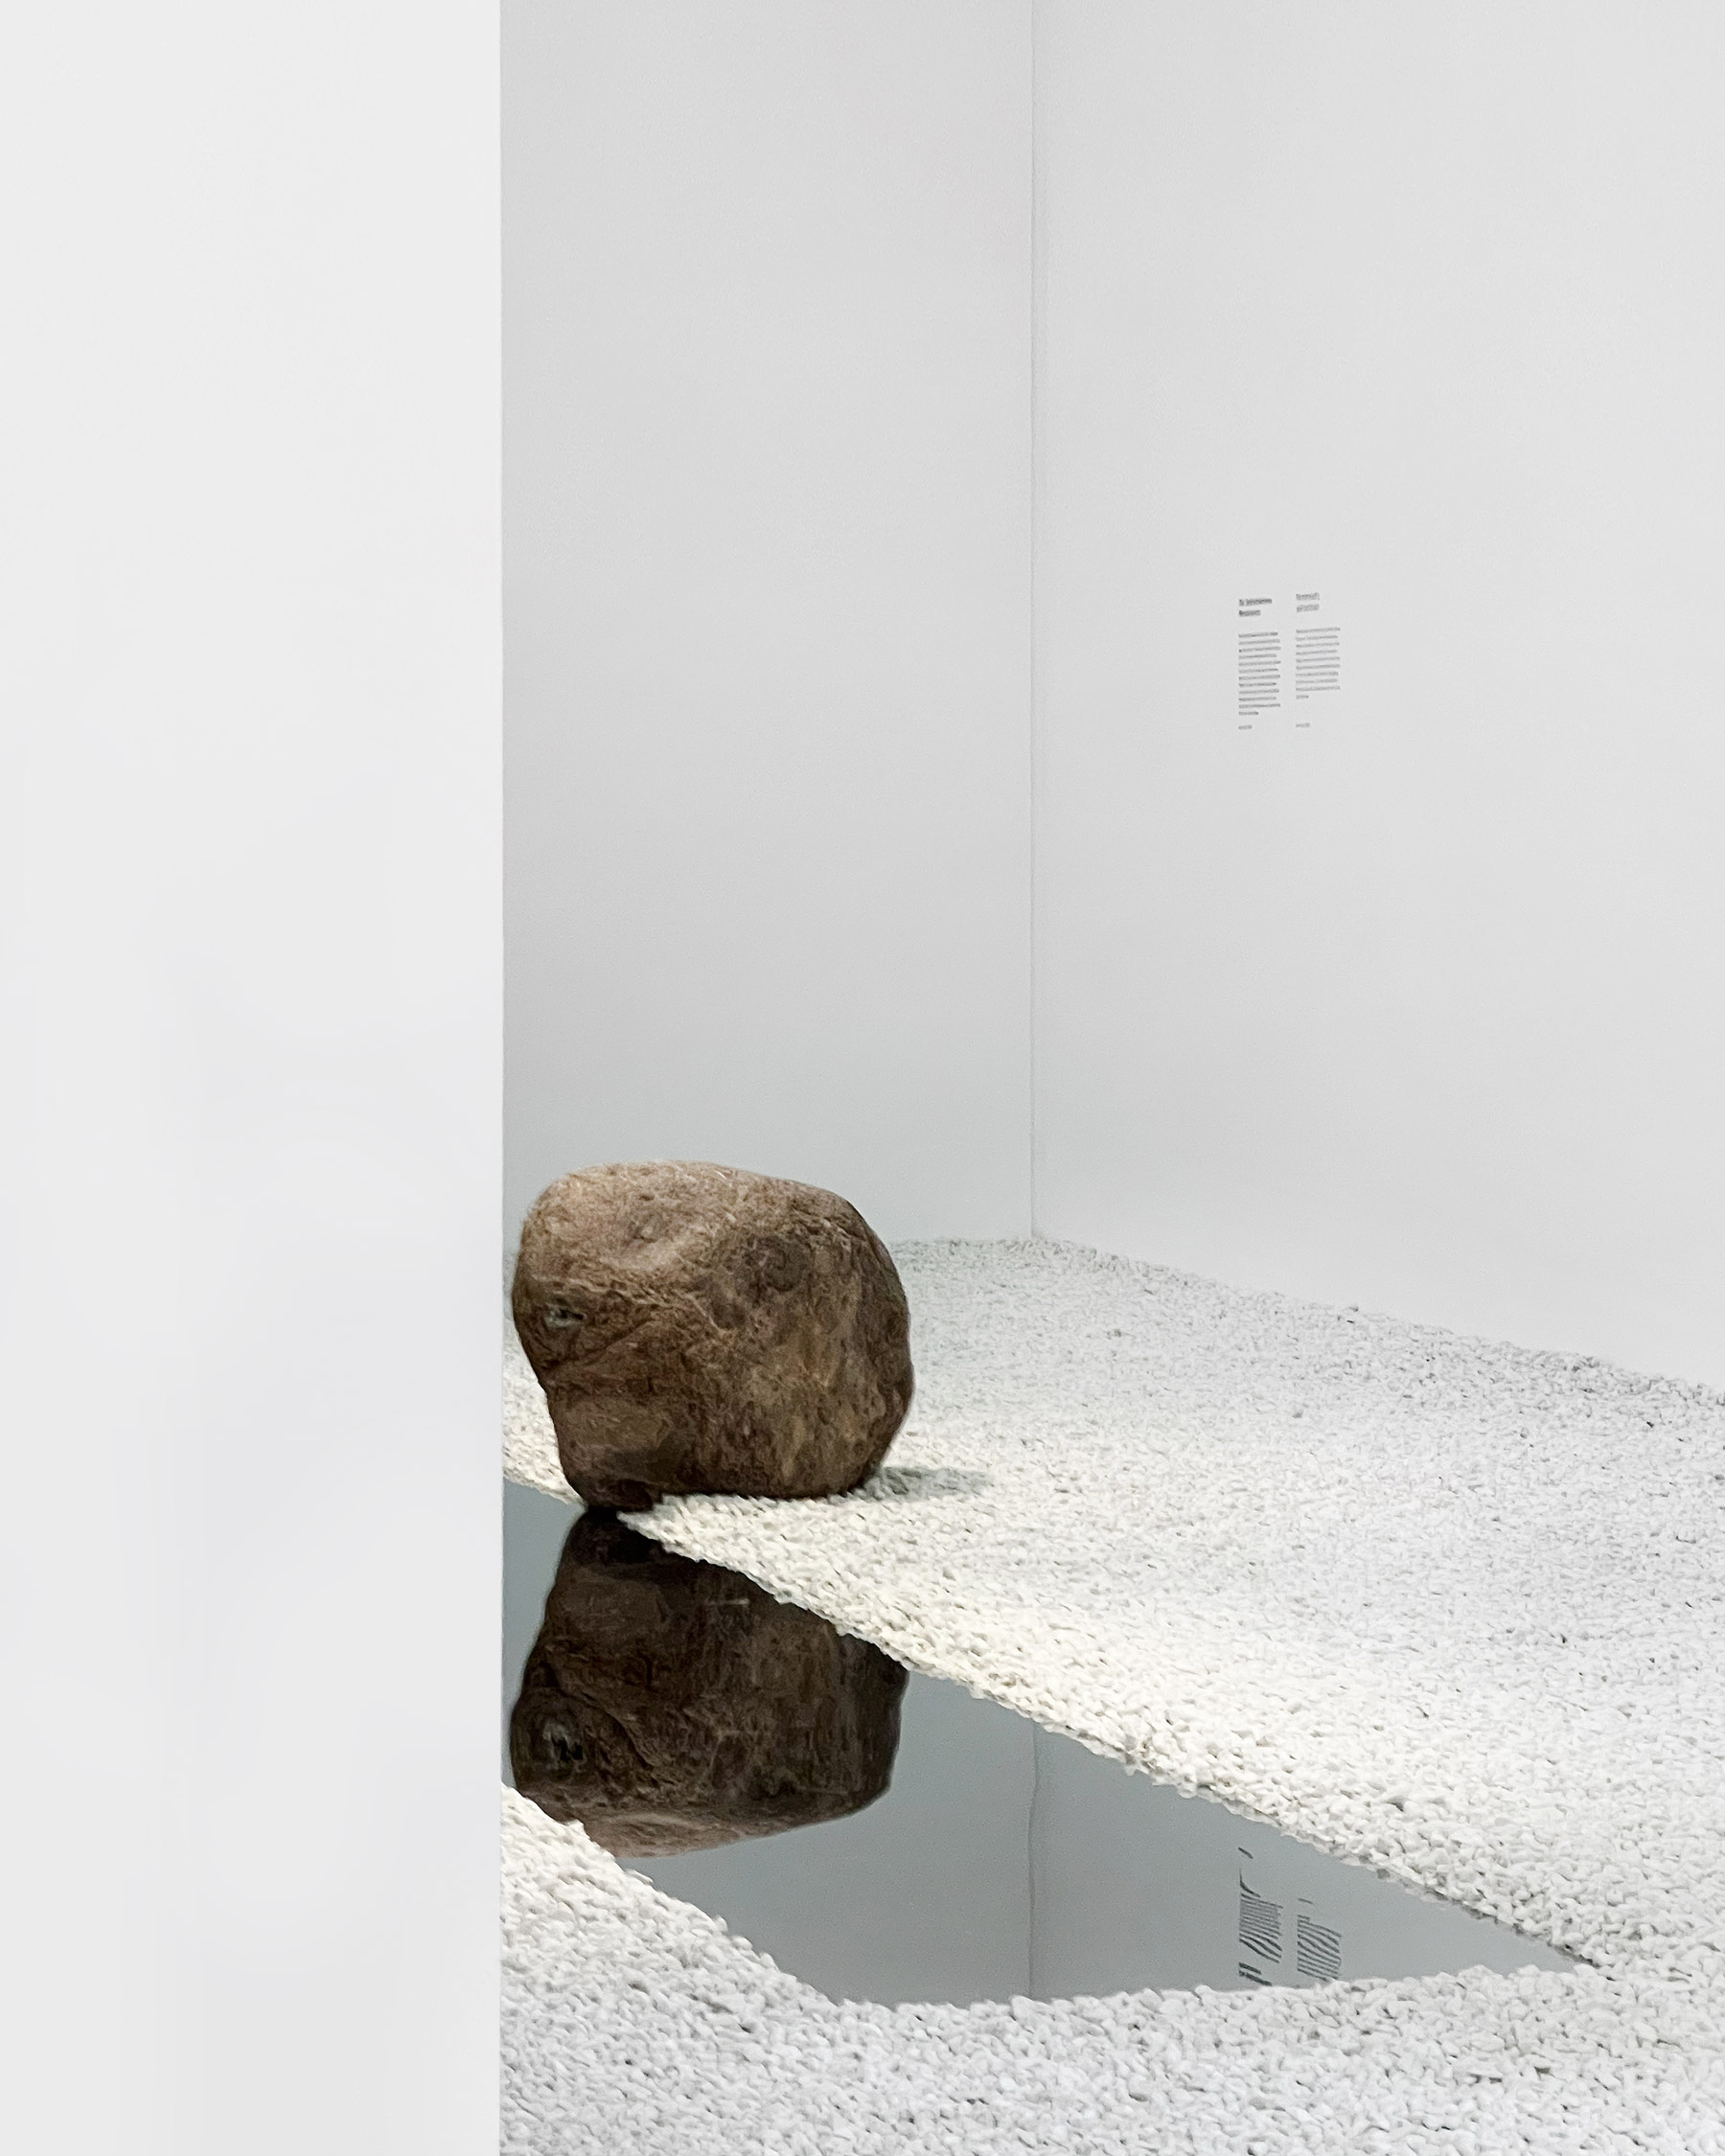 View of "Relatum - The narrow sky road", 2020/2023, stainless steel, stone, 400 x 80 x 2cm